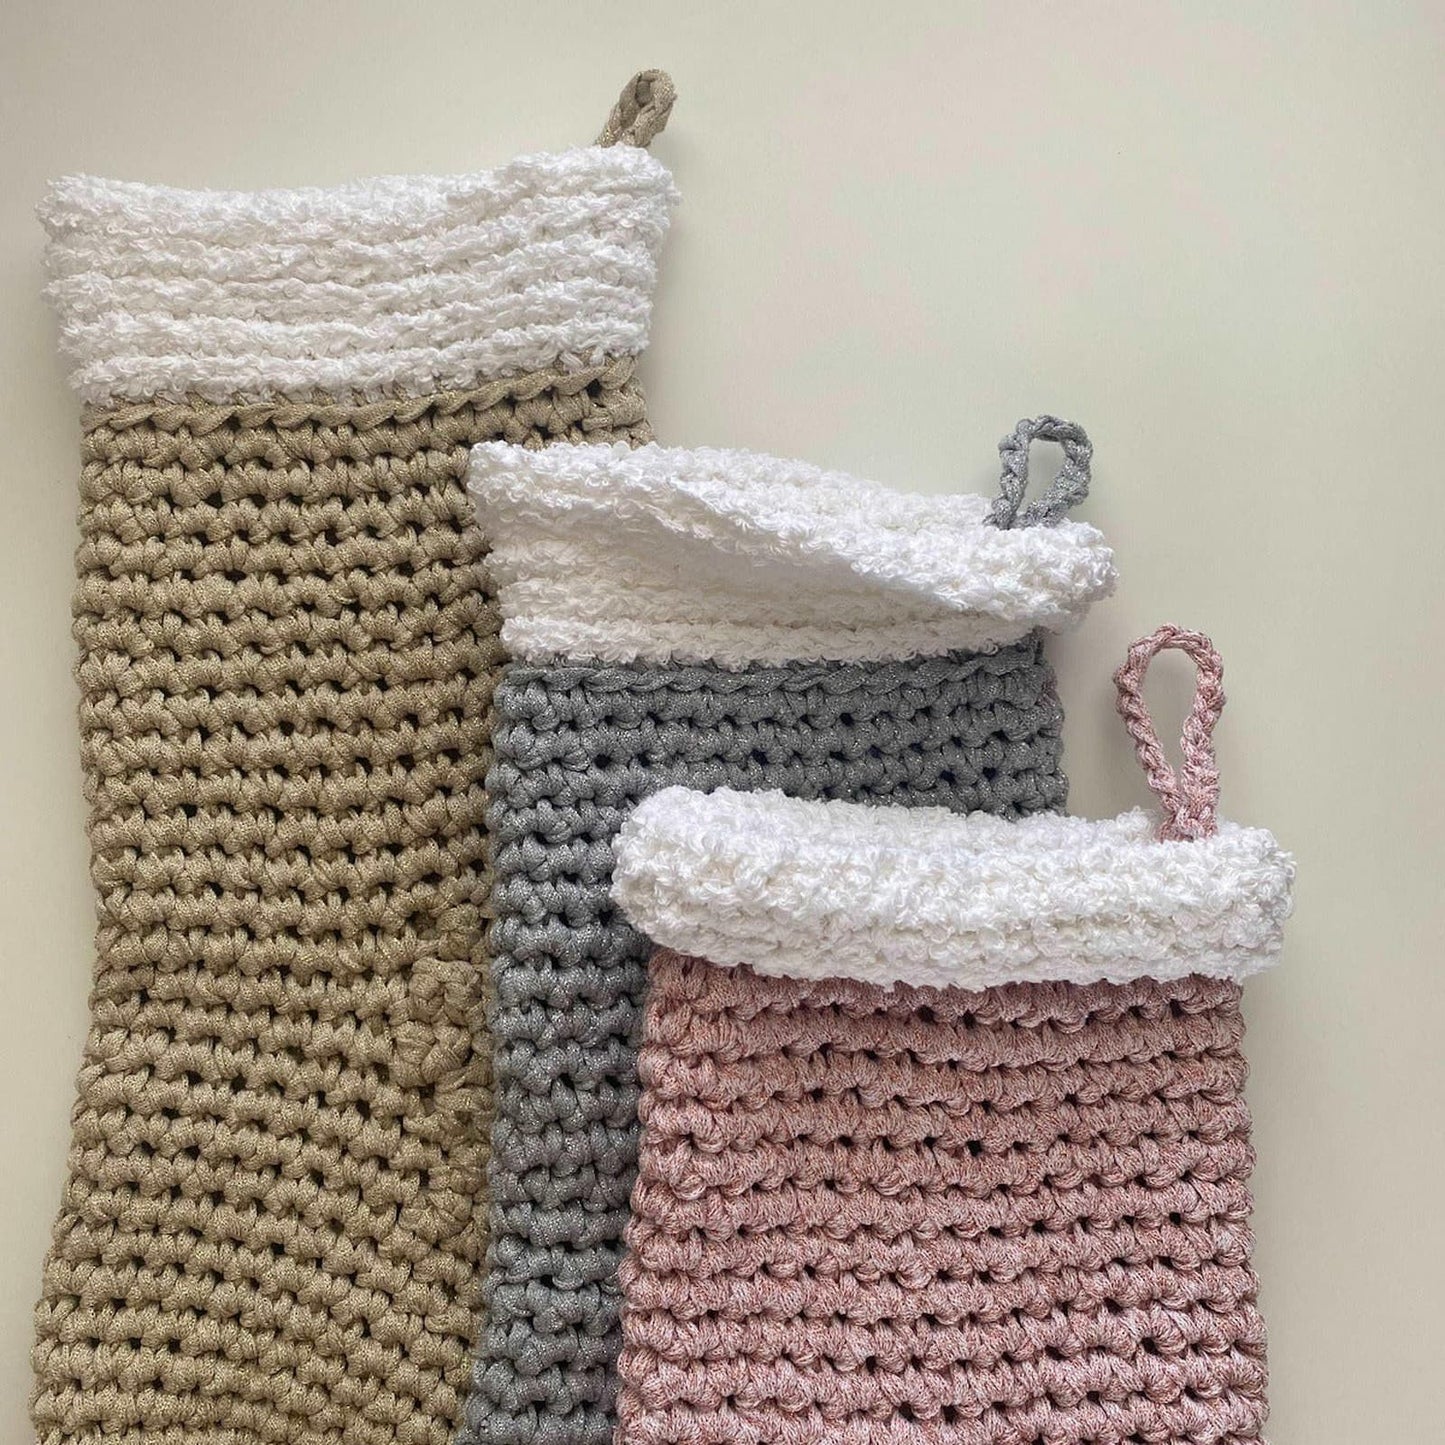 Chunky Knit Christmas Stocking - Silver Sparkly Christmas Decor - Looping Home